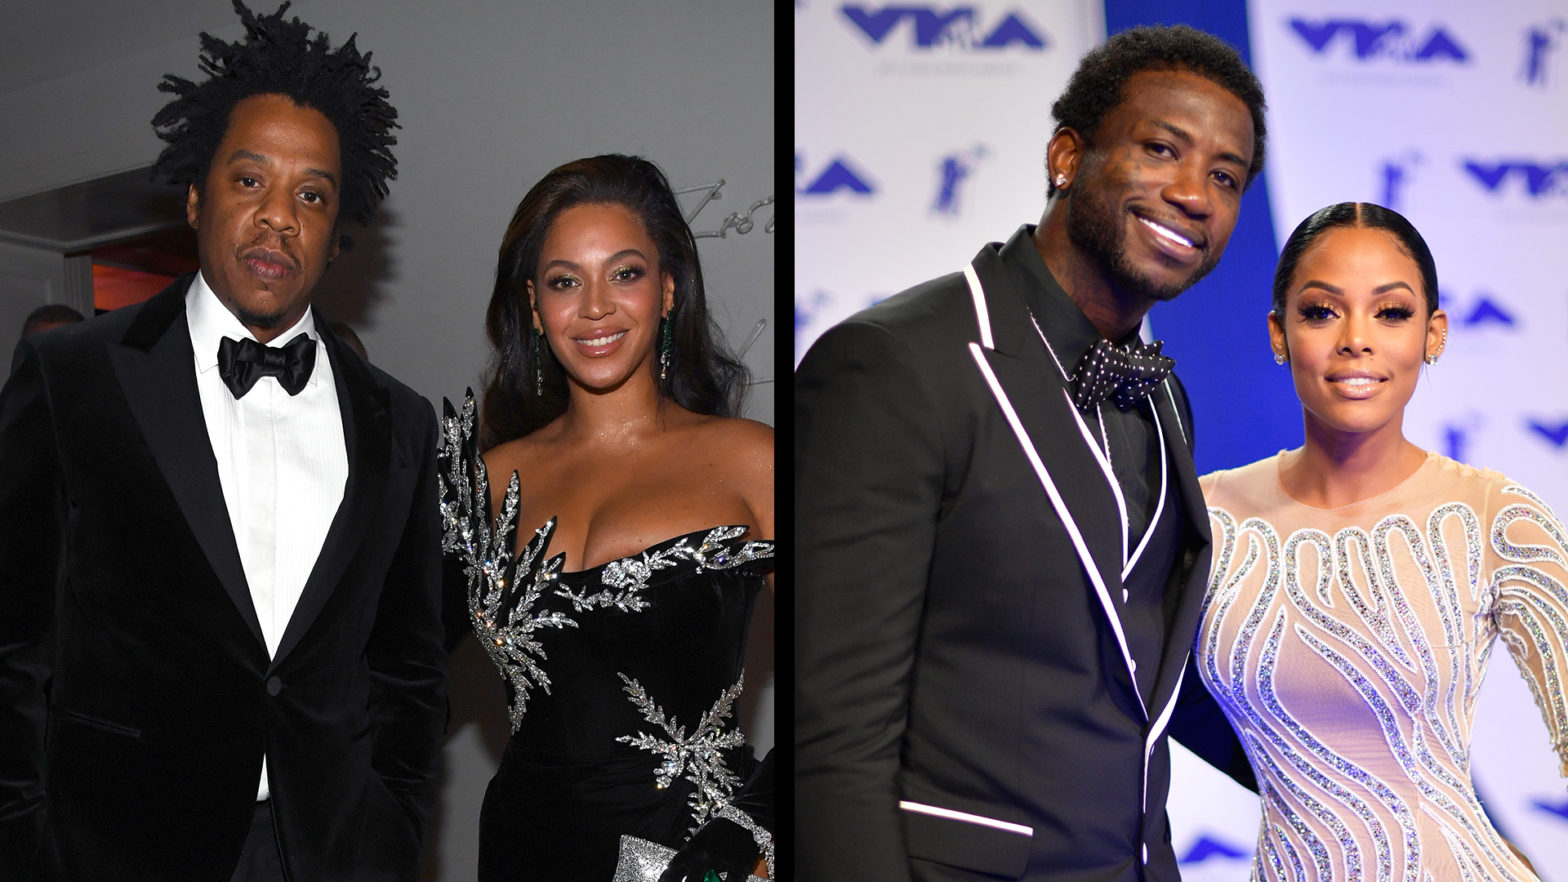 From Jay-Z & Beyoncé To Gucci & Keyshia Ka'oir — Here Are 10 Black Power Couples & Their Worth